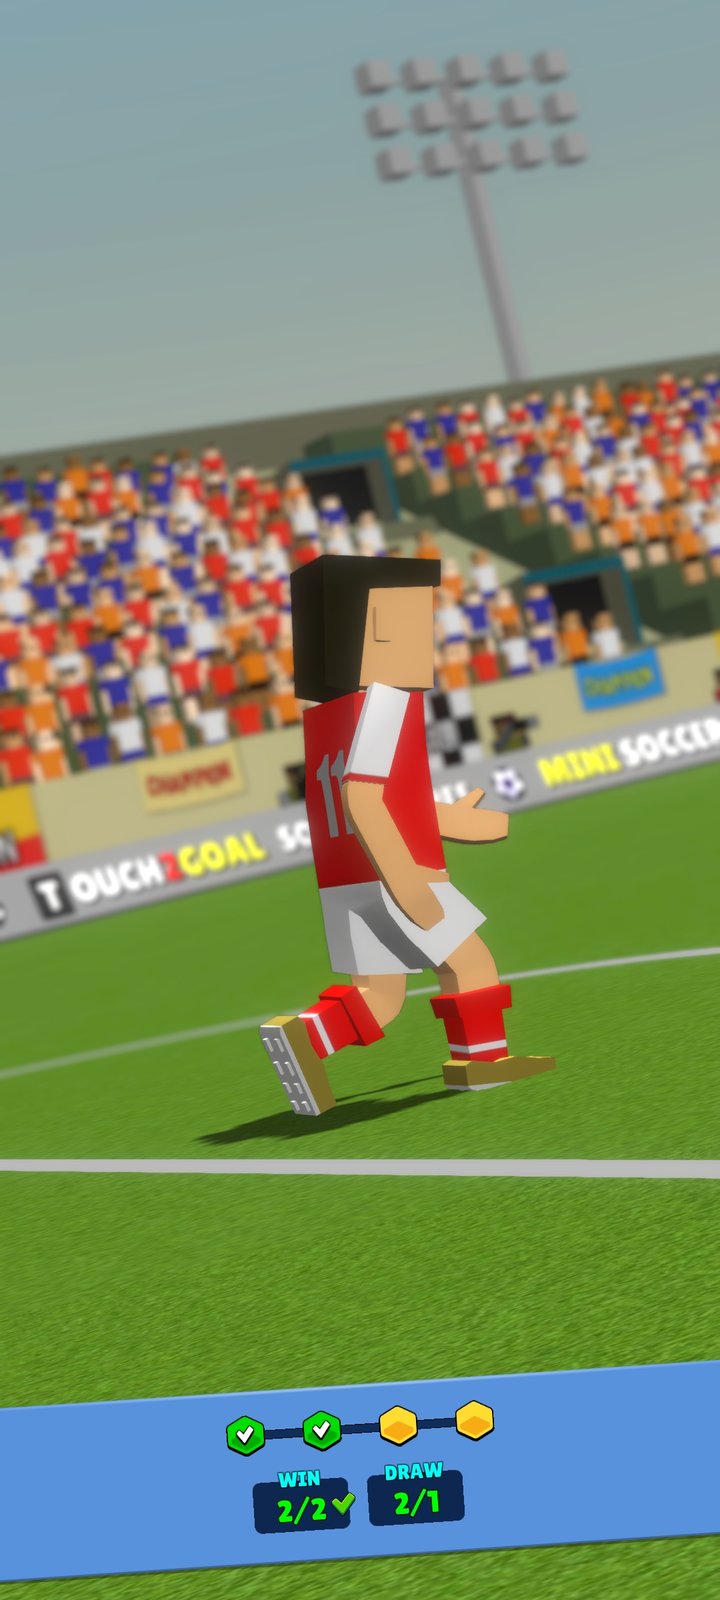 Mini Soccer Star - 2023 MLS v0.94 MOD APK -  - Android & iOS  MODs, Mobile Games & Apps